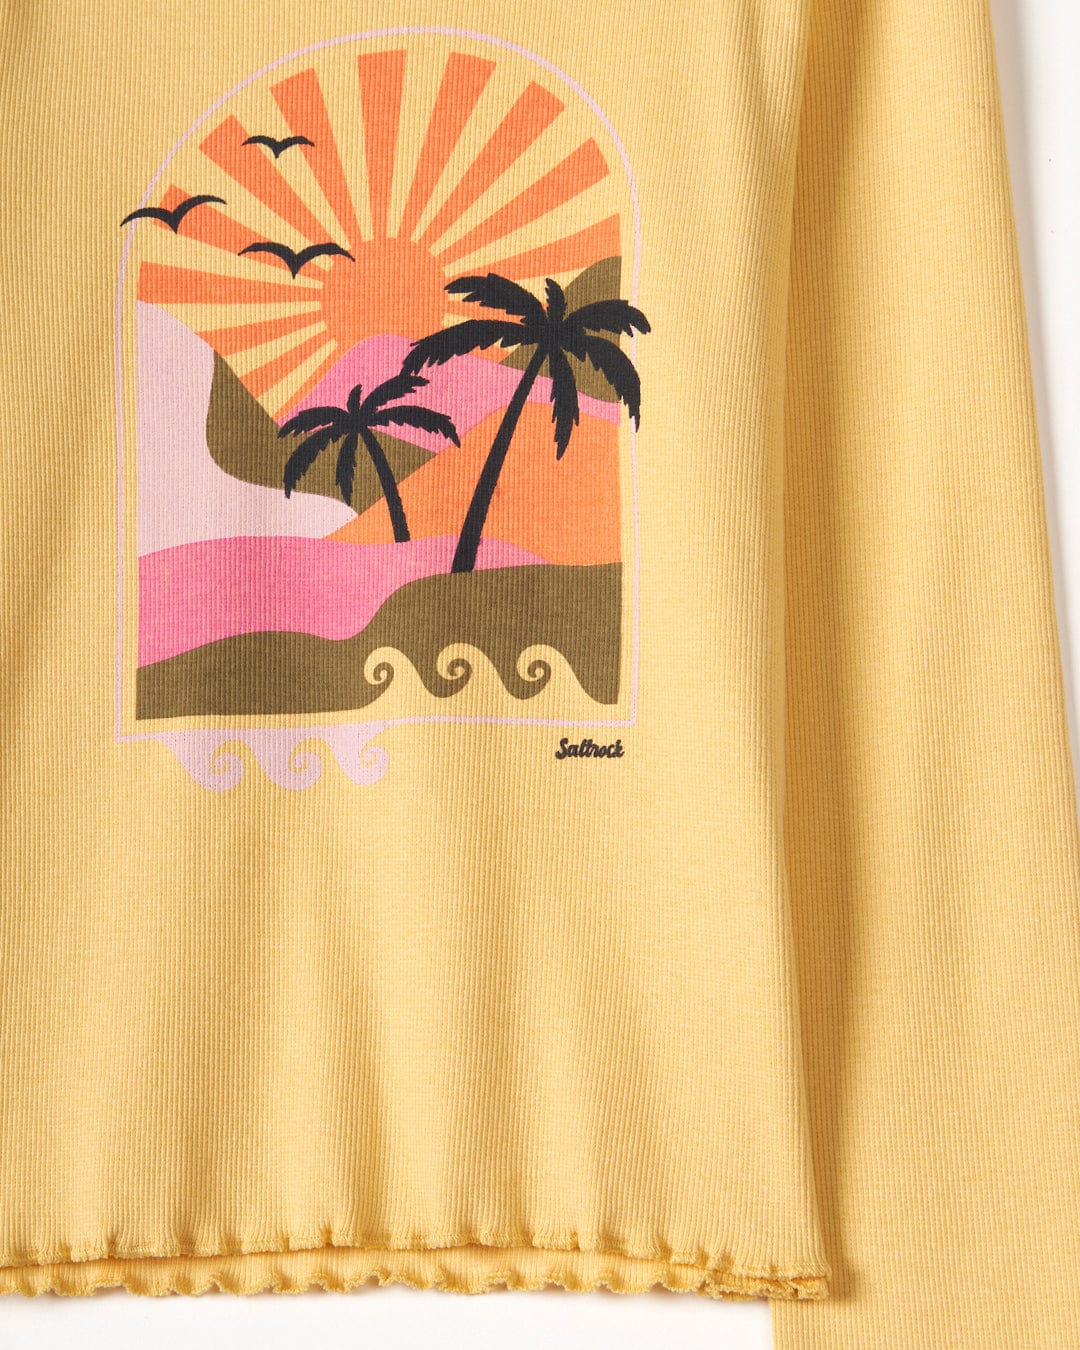 A stretchy jersey Retro Seascape - Kids Long Sleeve T-Shirt in yellow with a sunset print featuring palm trees by Saltrock.